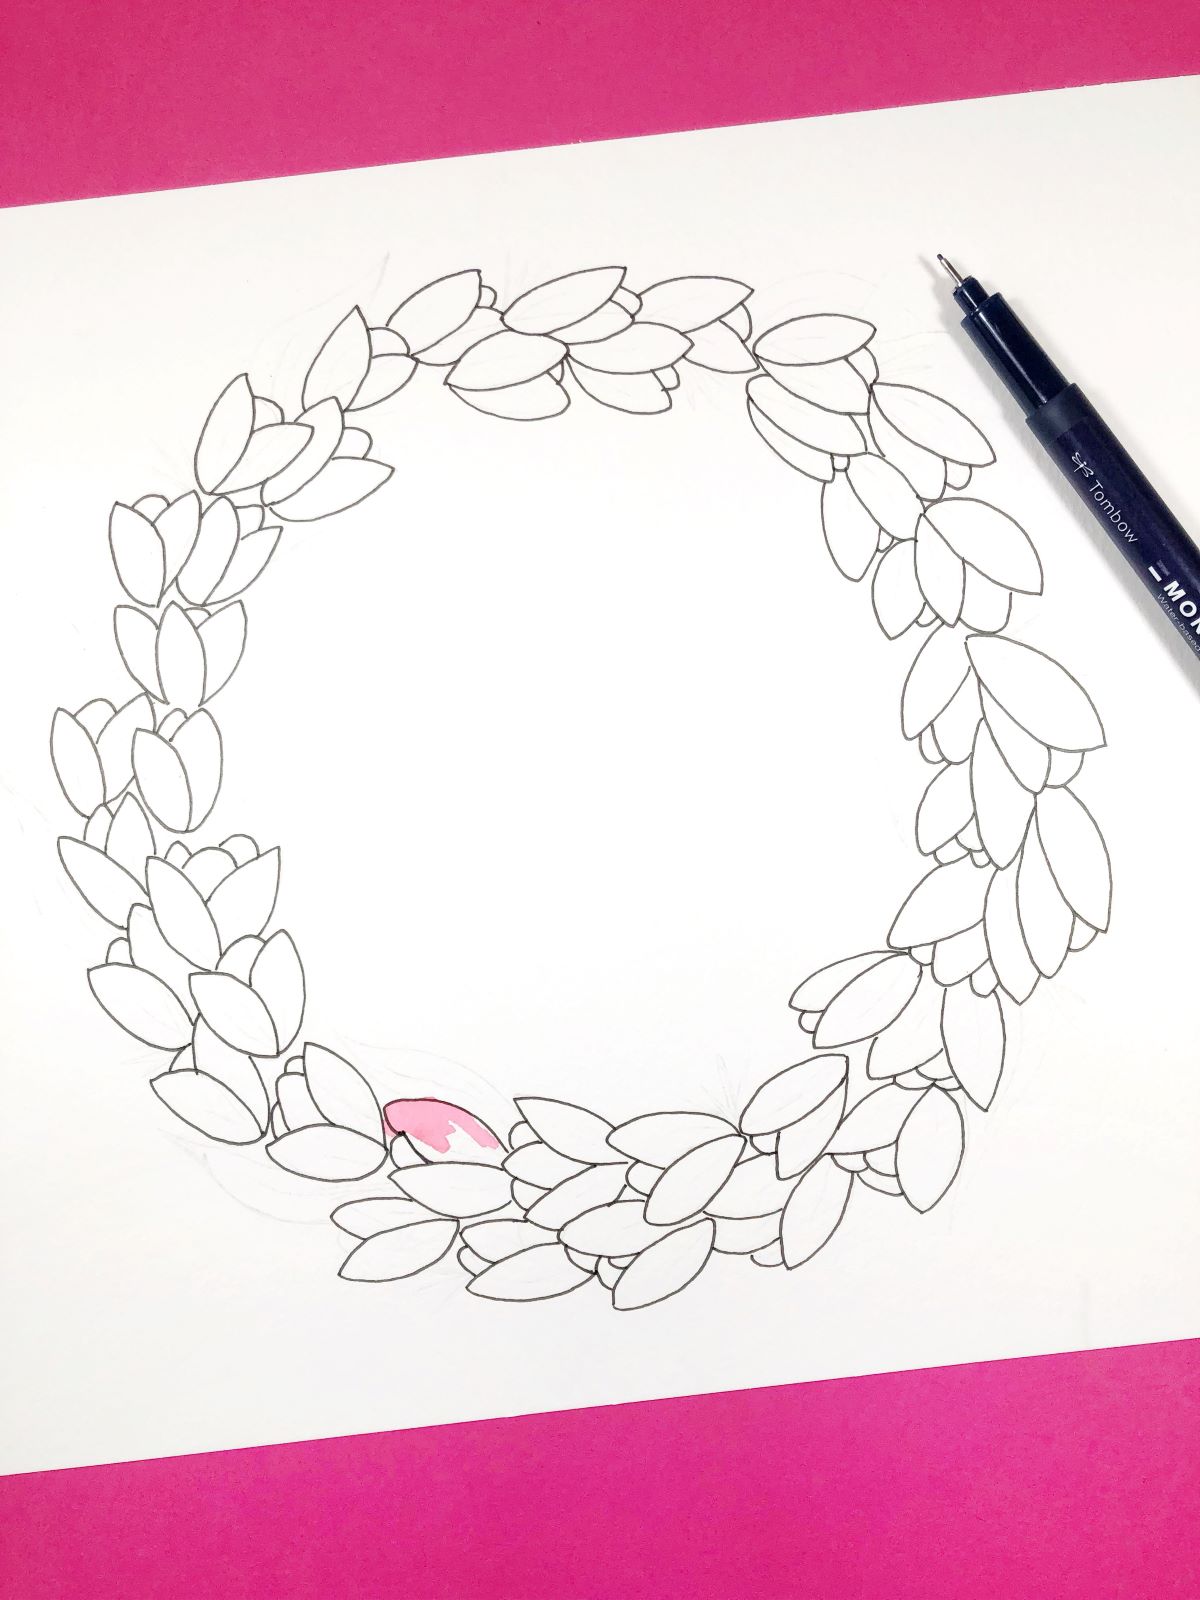 Watercolor Wreath using @tombowusa Dual Brush Pens. Learn how with @aheartenedcalling #tombow #watercolor